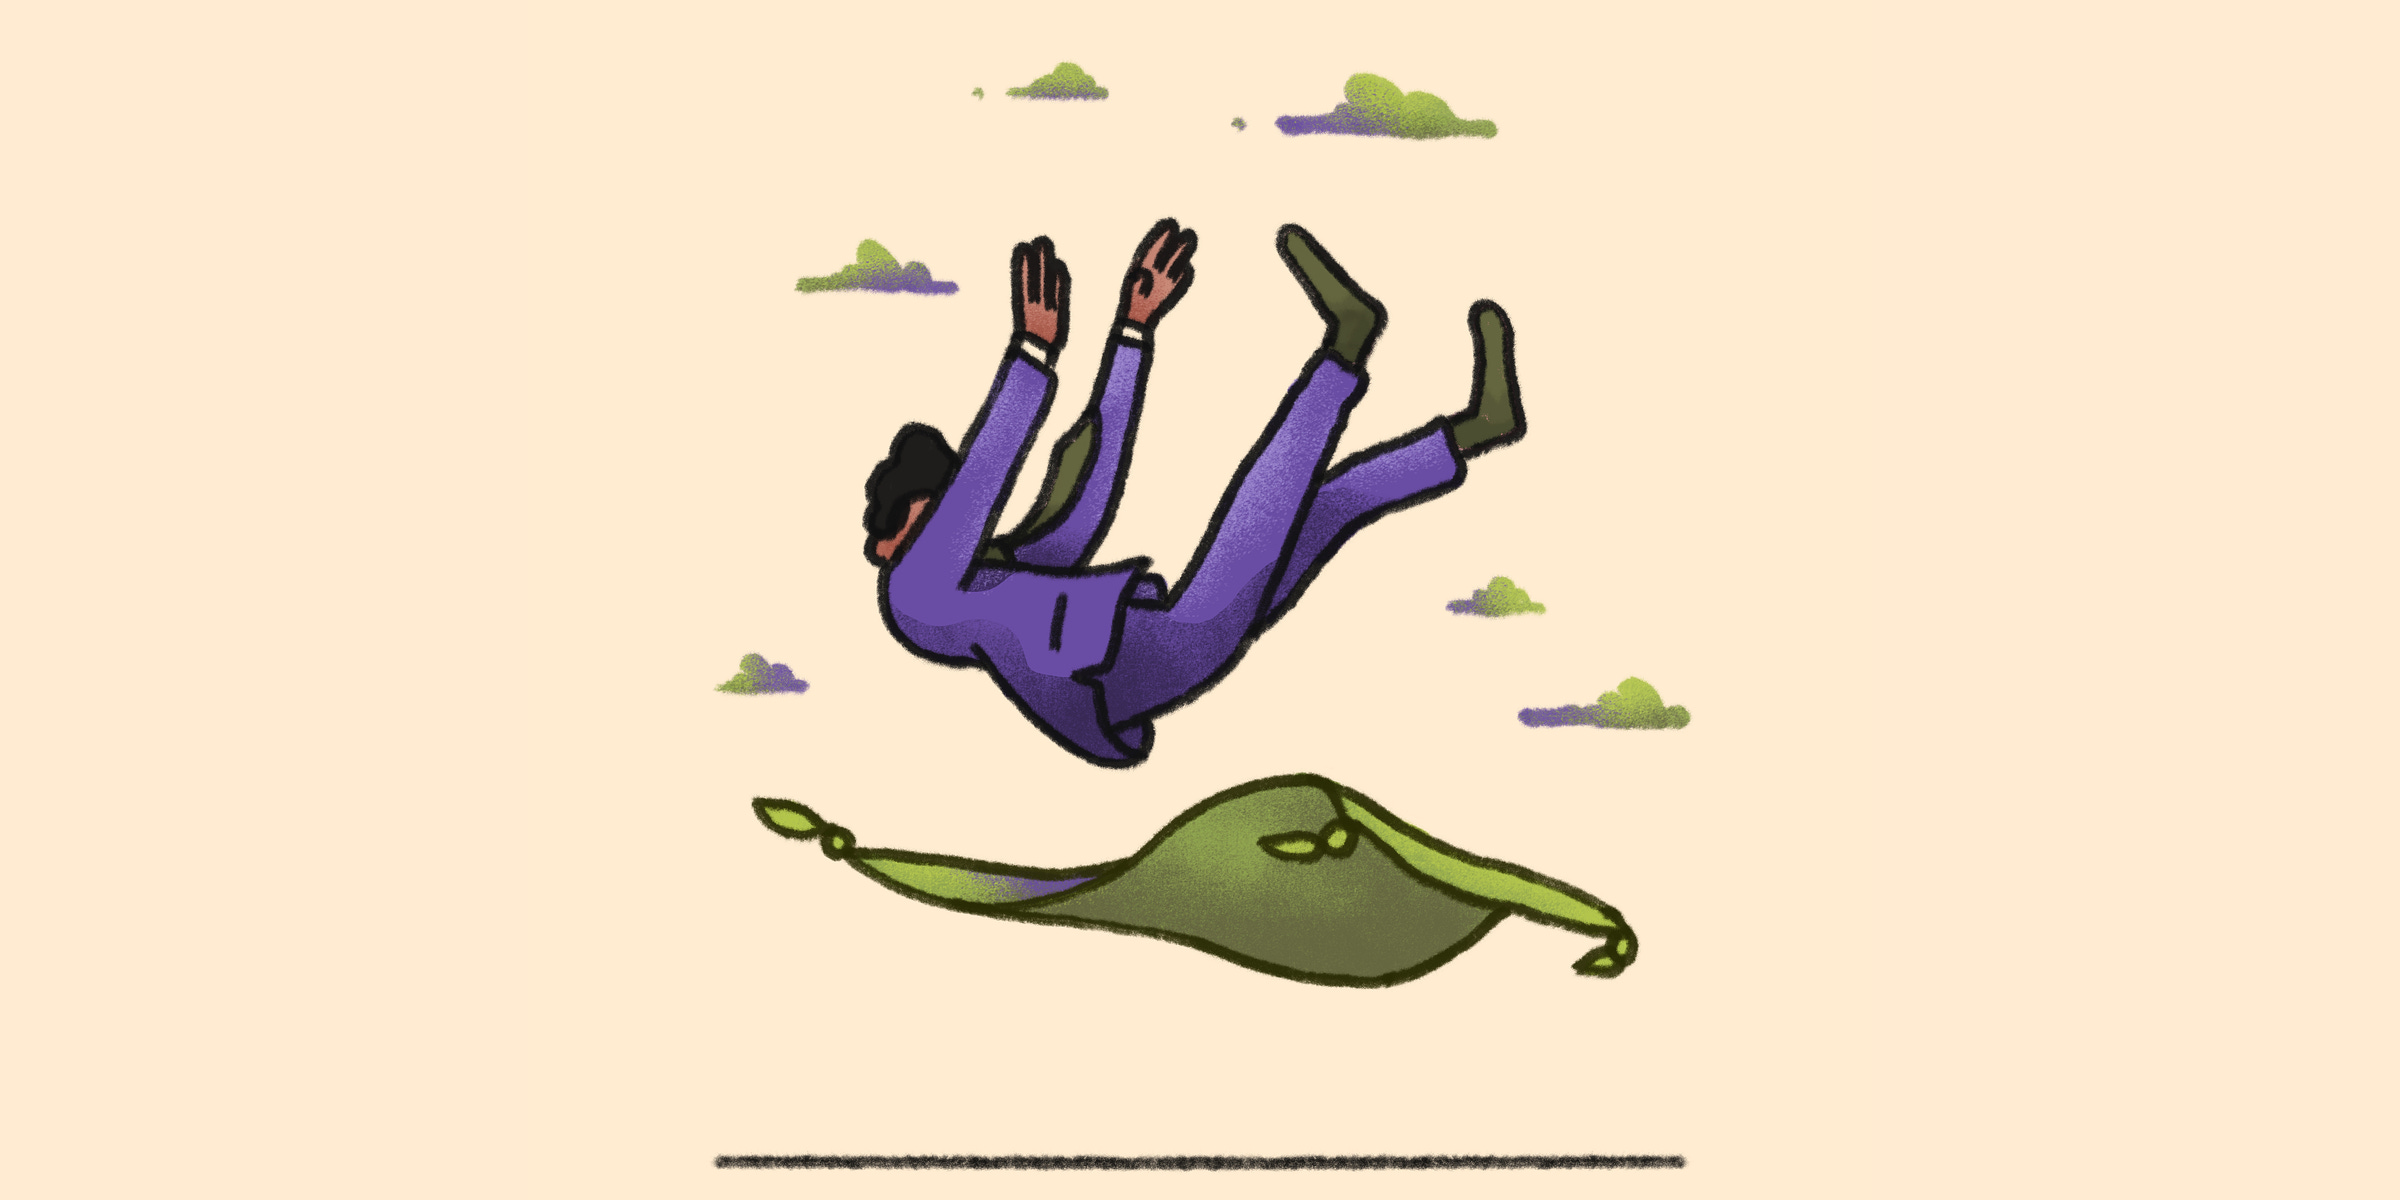 Art showcasing a man wearing a suit falling from the sky and about to land on a carpet floating just above the ground